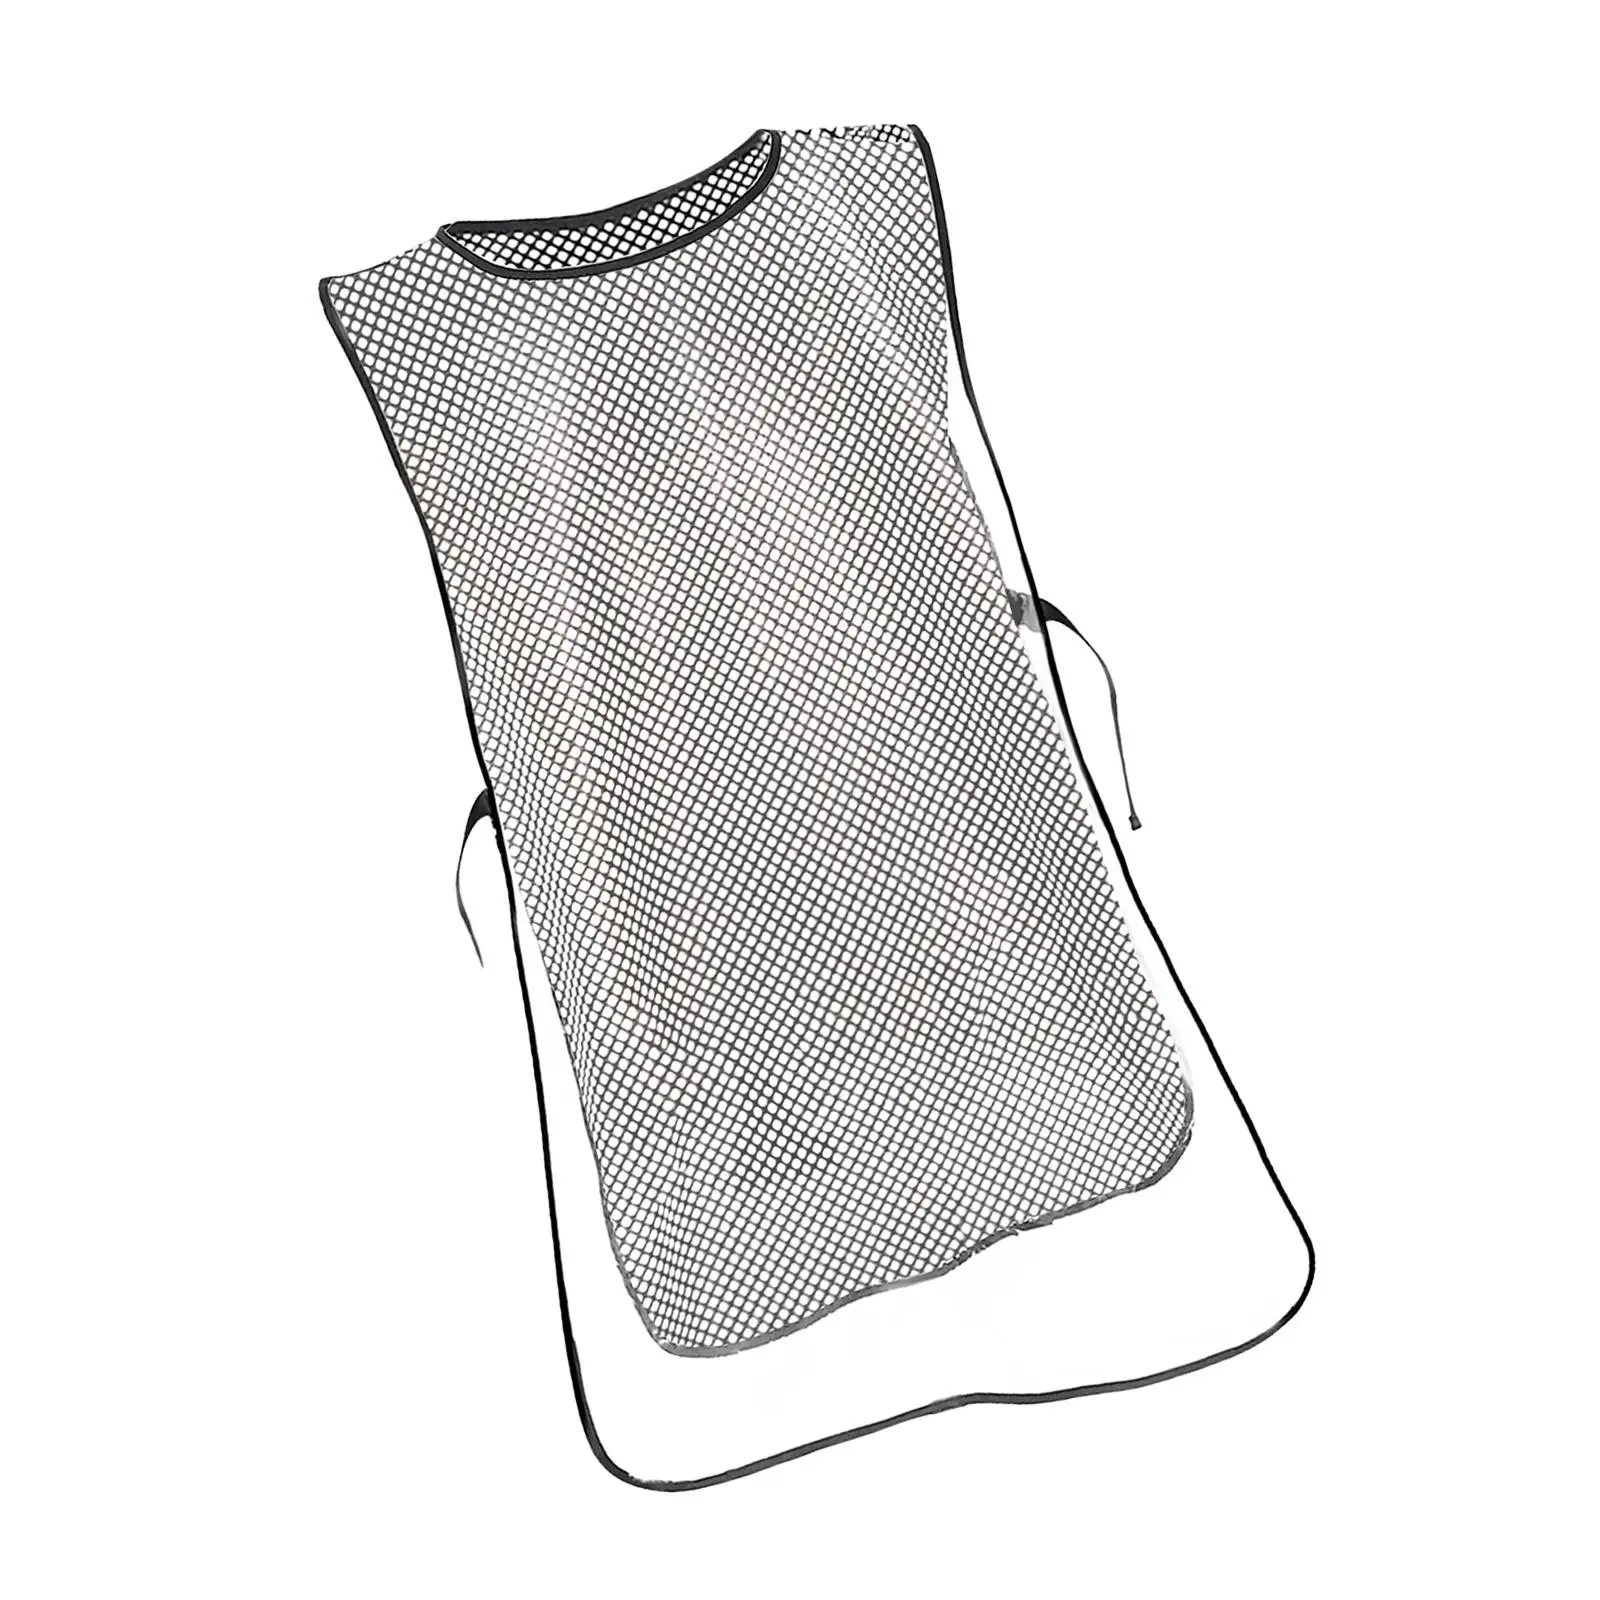 Transparent Apron TPU Oil Resistant Lightweight Easy to Clean Waterproof Apron for Nail Stylist Accessories Barber Hairstylist